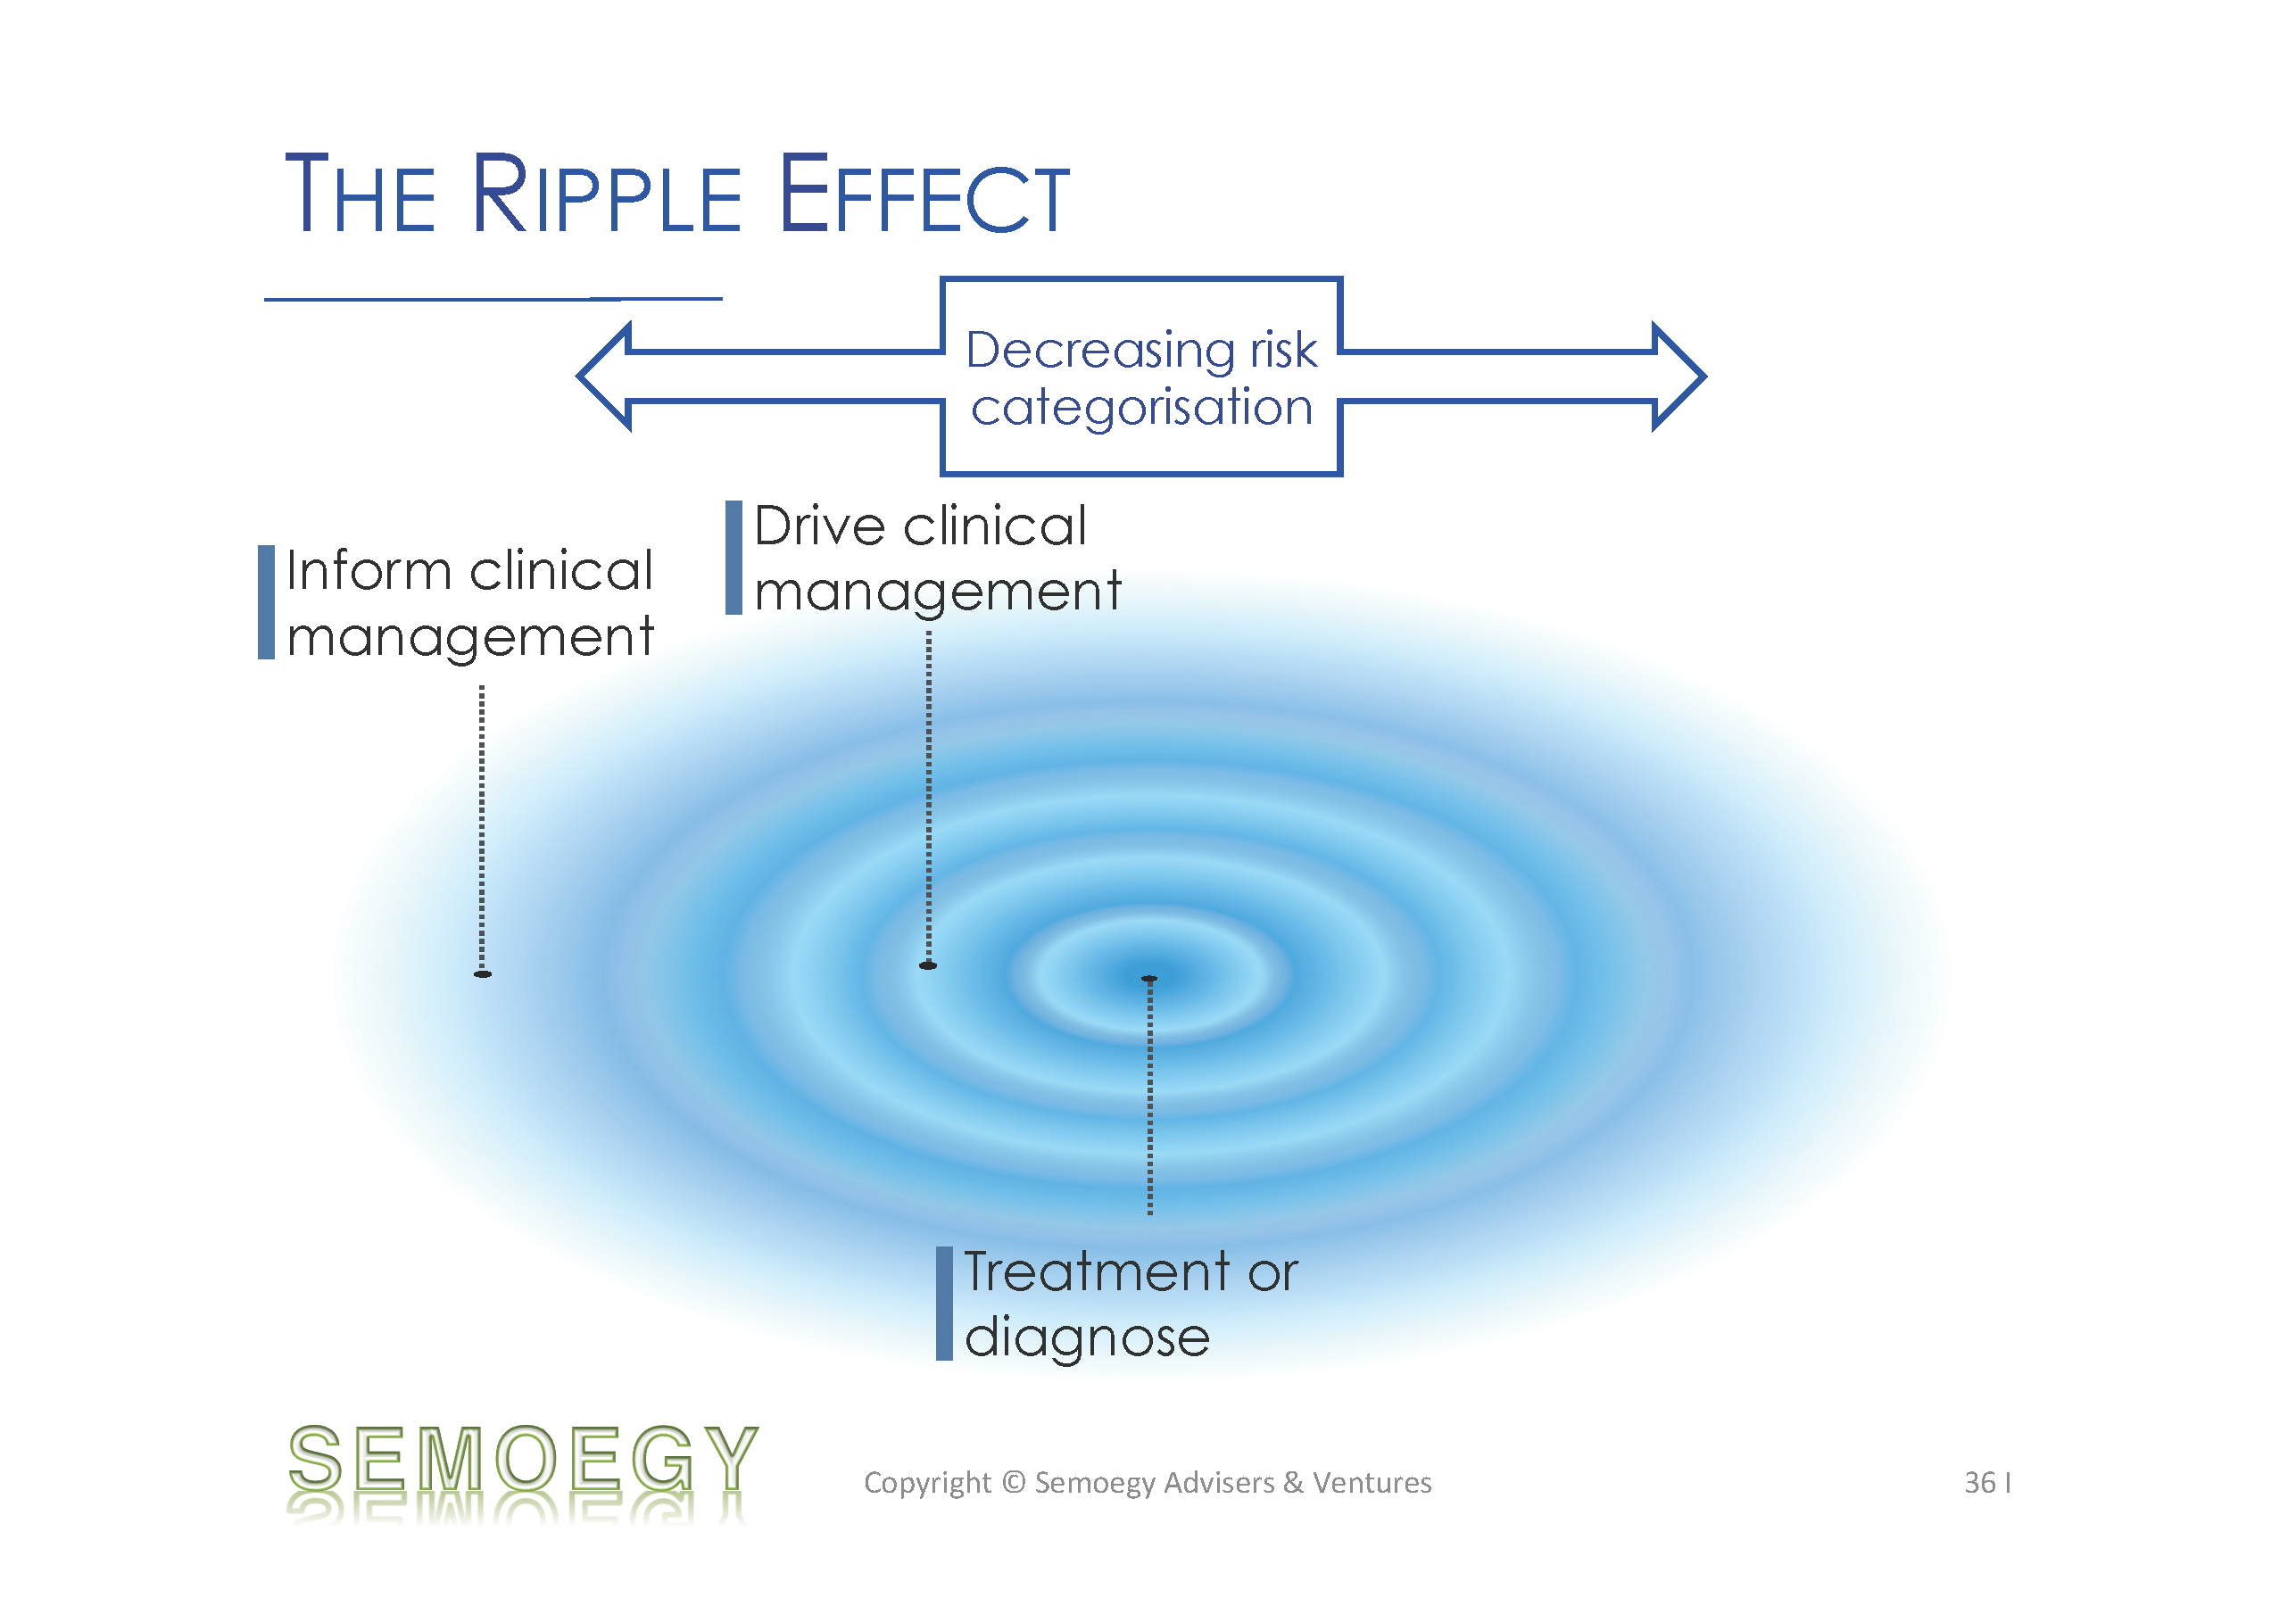 The Ripple Effect - Medical Device Definition